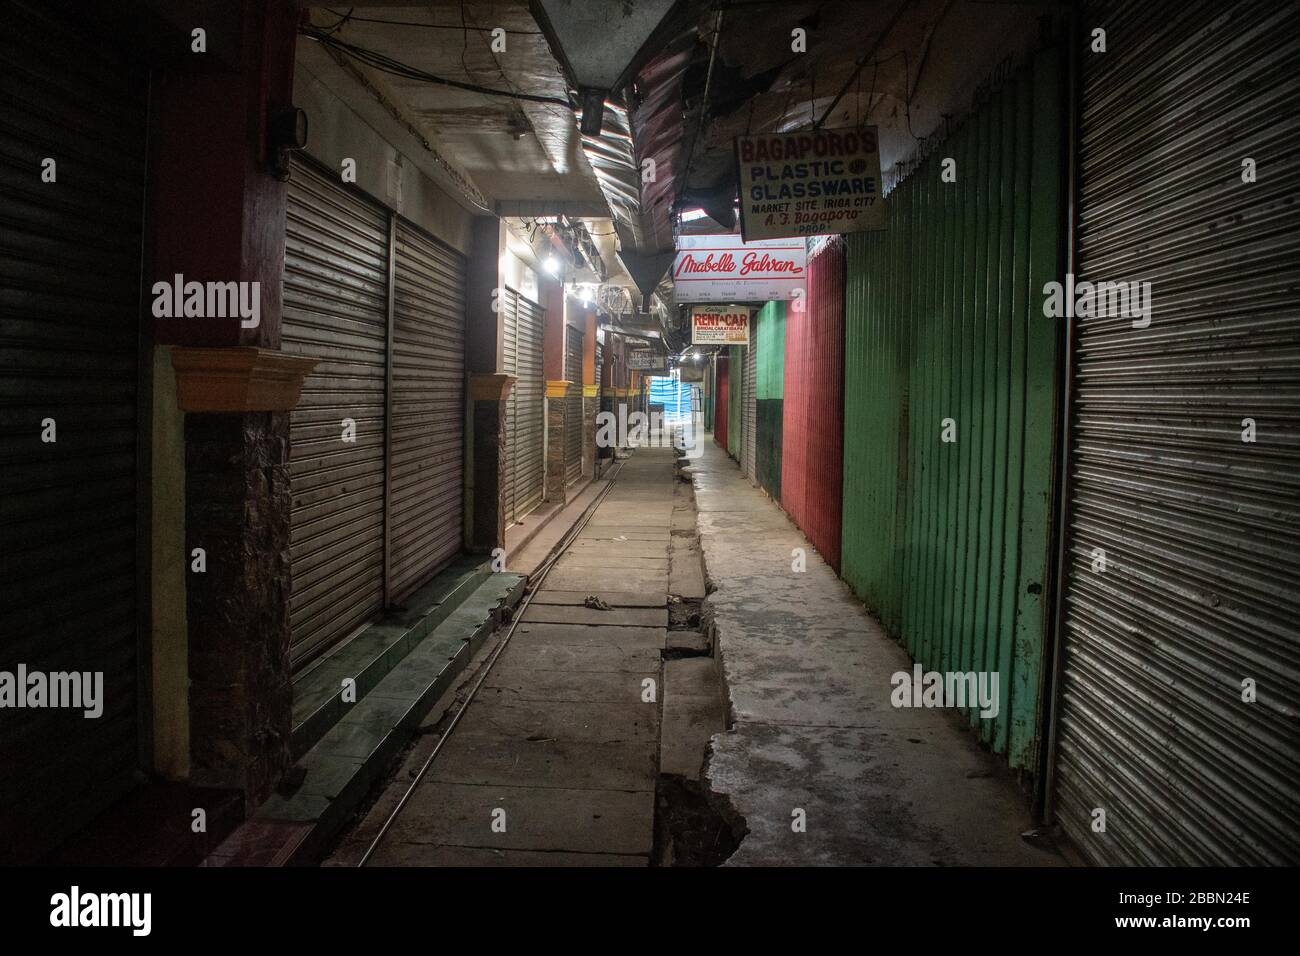 Closed stores in the Philippines due to Corona virus lock down effect in a public market Stock Photo